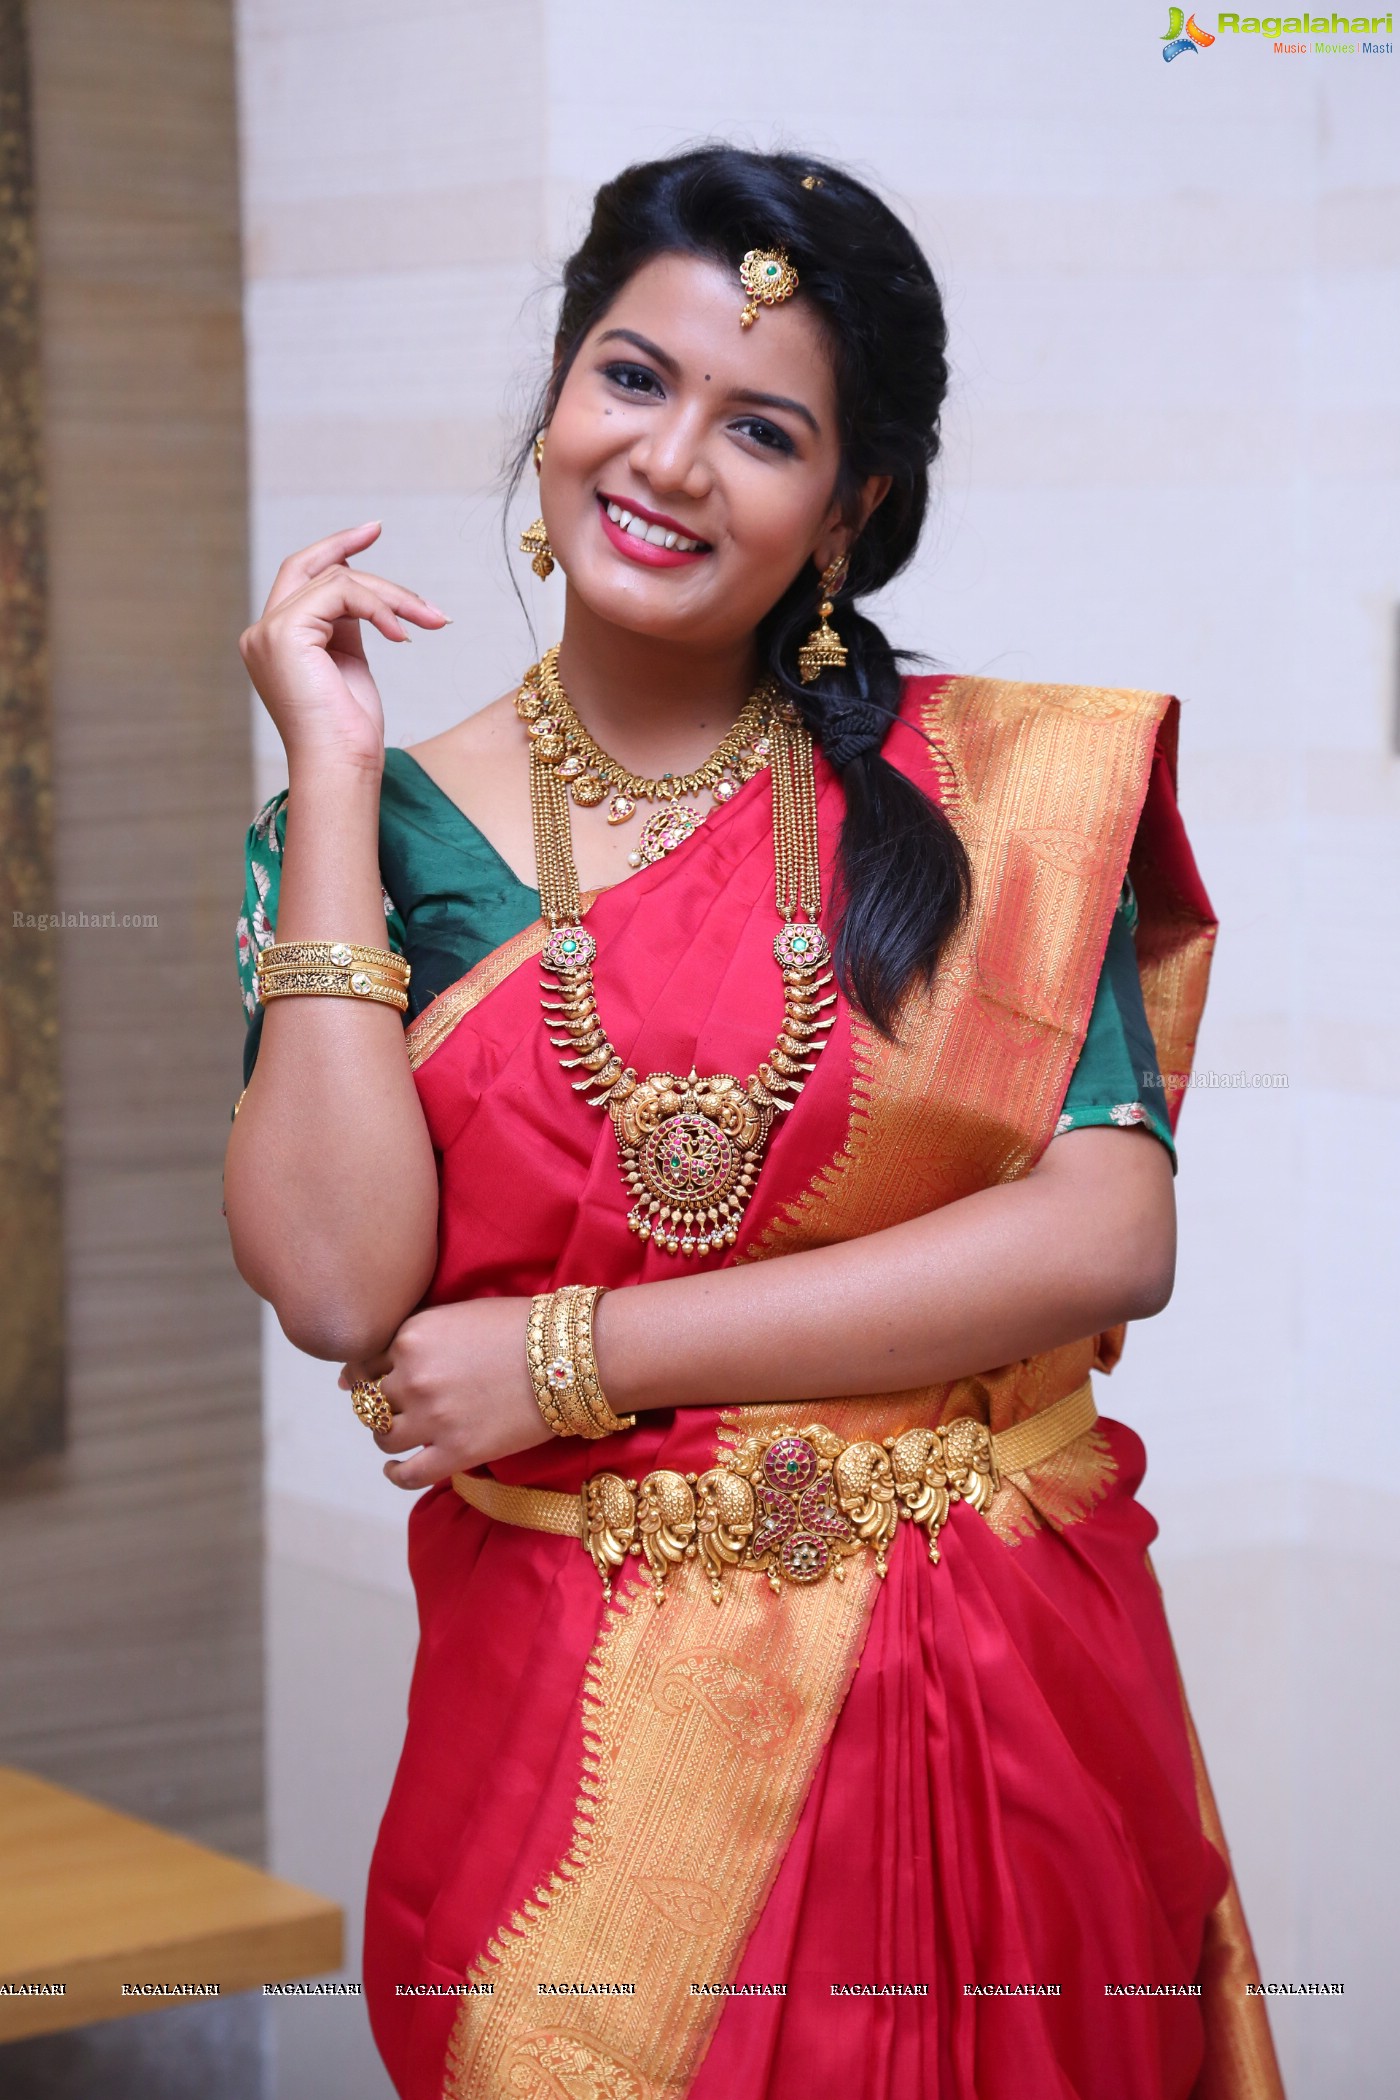 Goldie at Manepally Jewellers Uncut Diamond Collection Showcase (Posters)